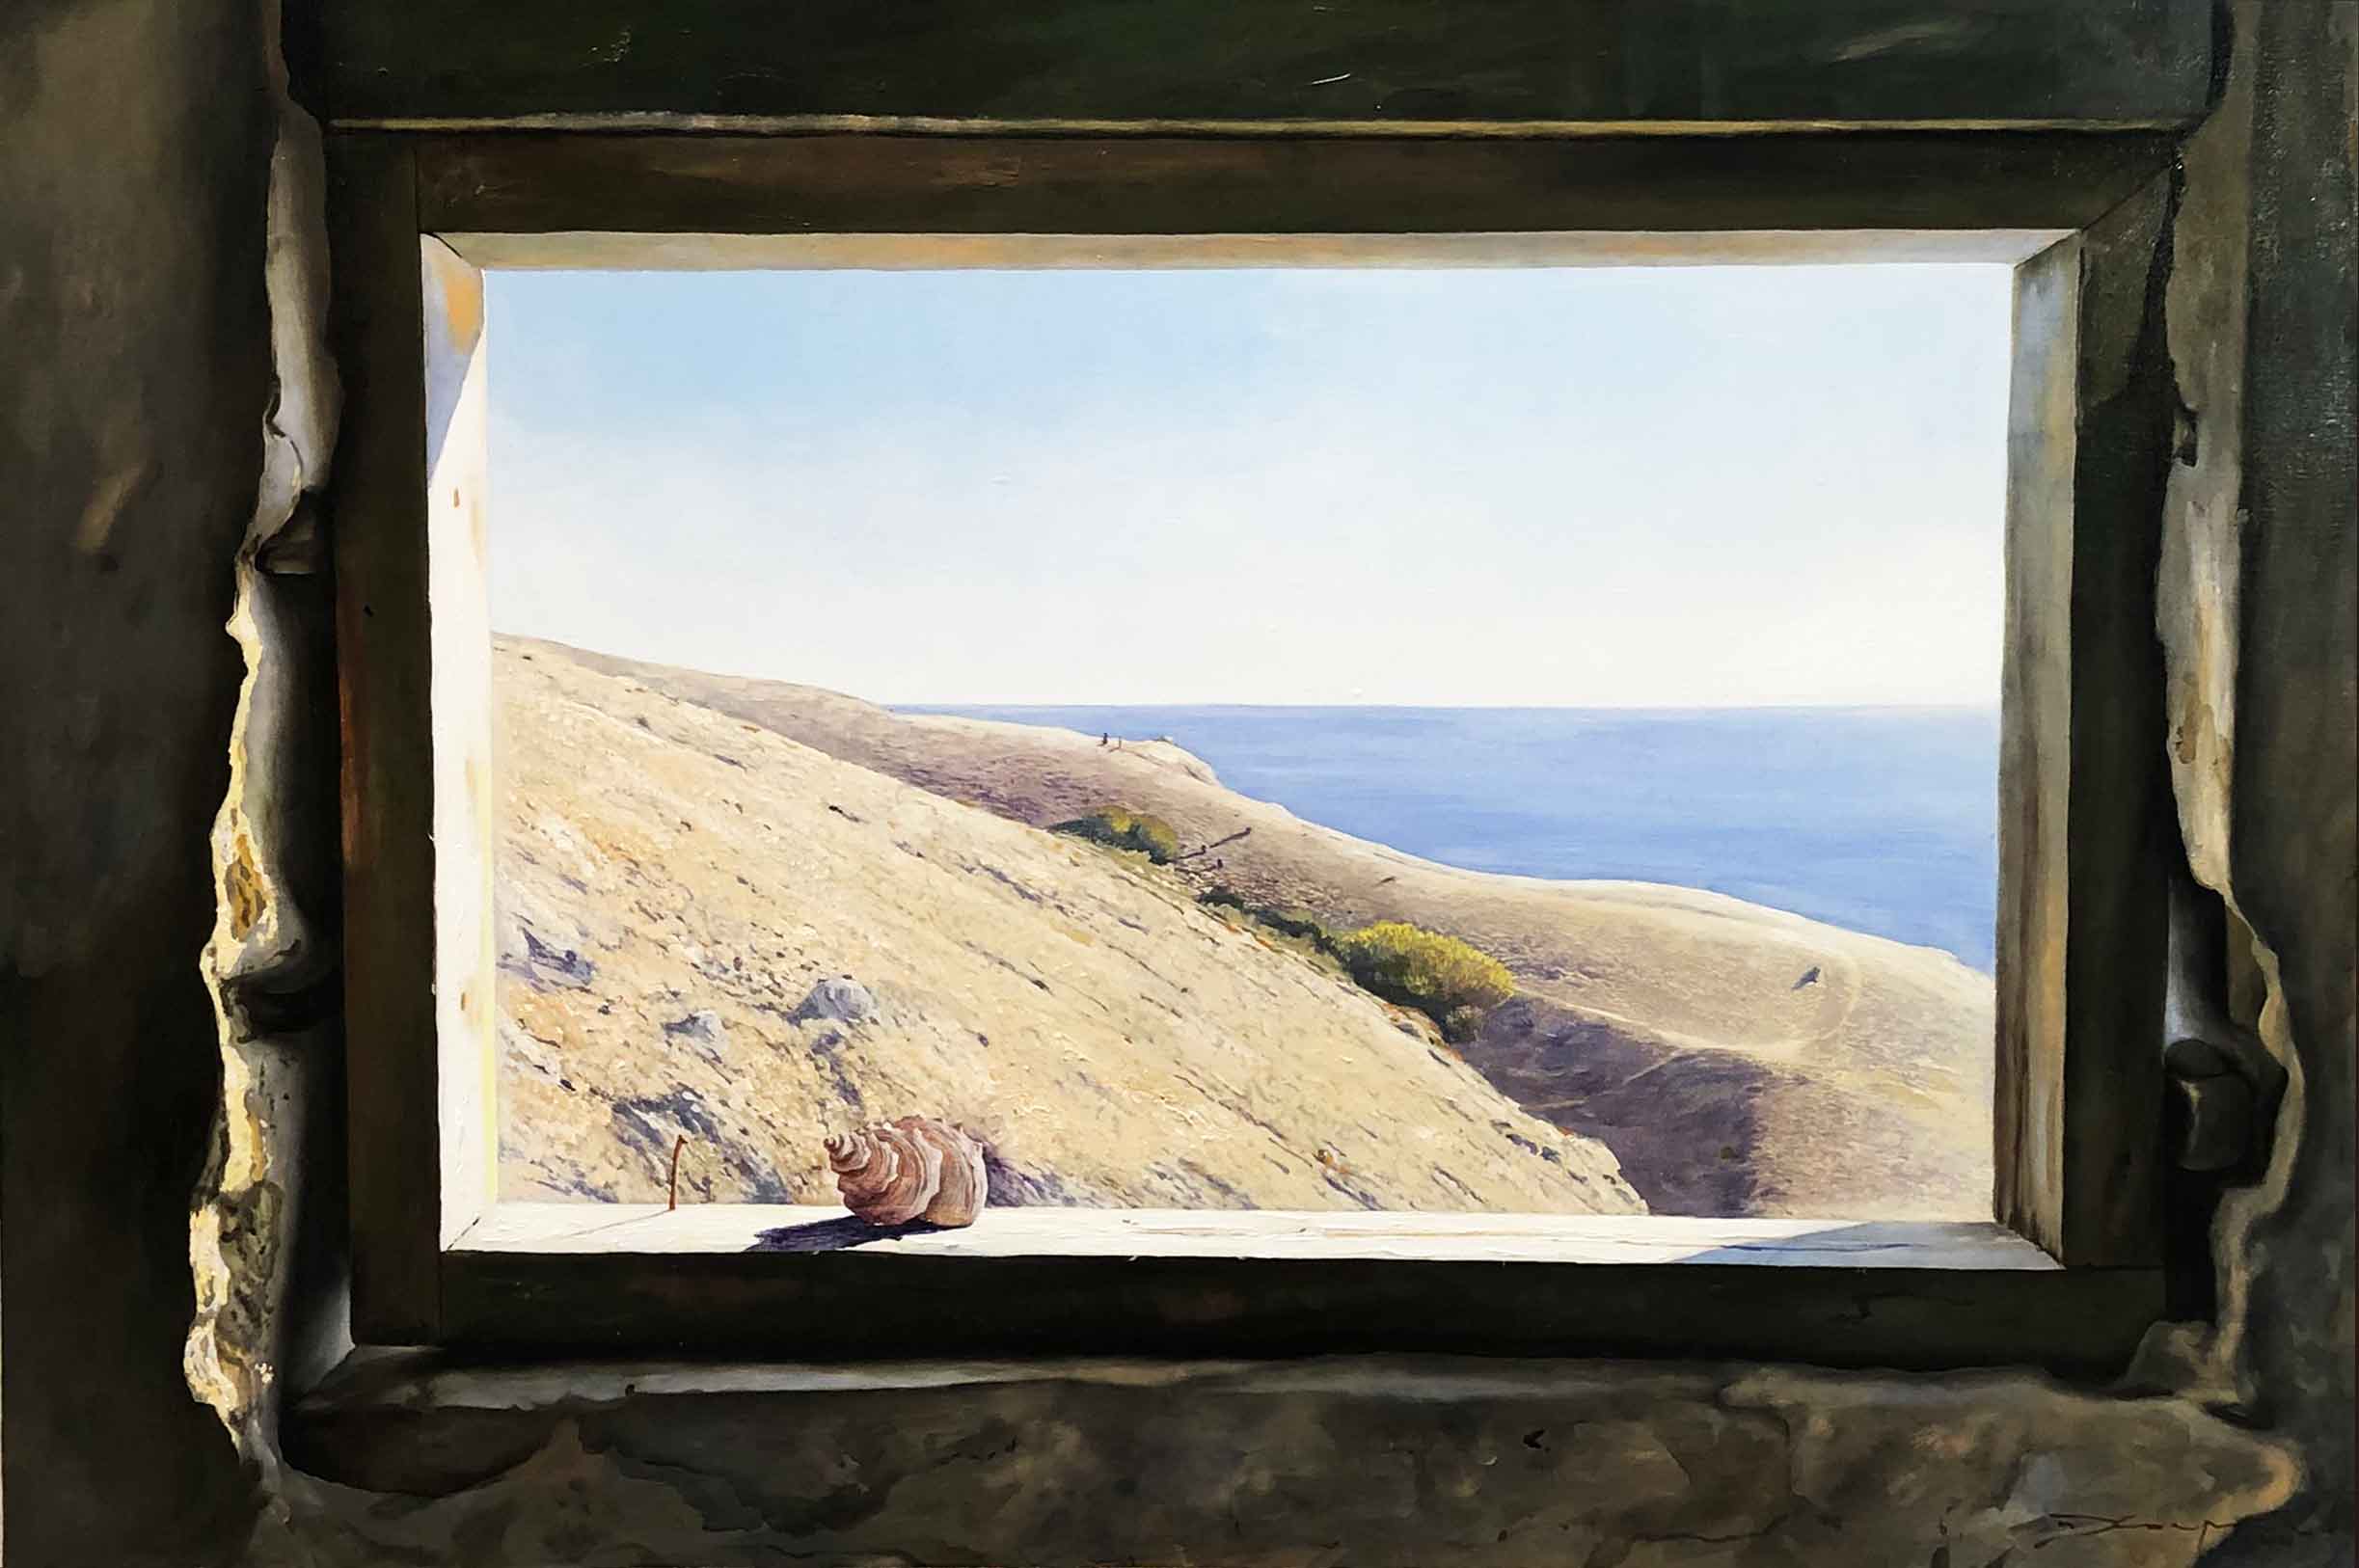 The Window to Summer - 1, Ilya Khokhrin, Buy the painting Oil